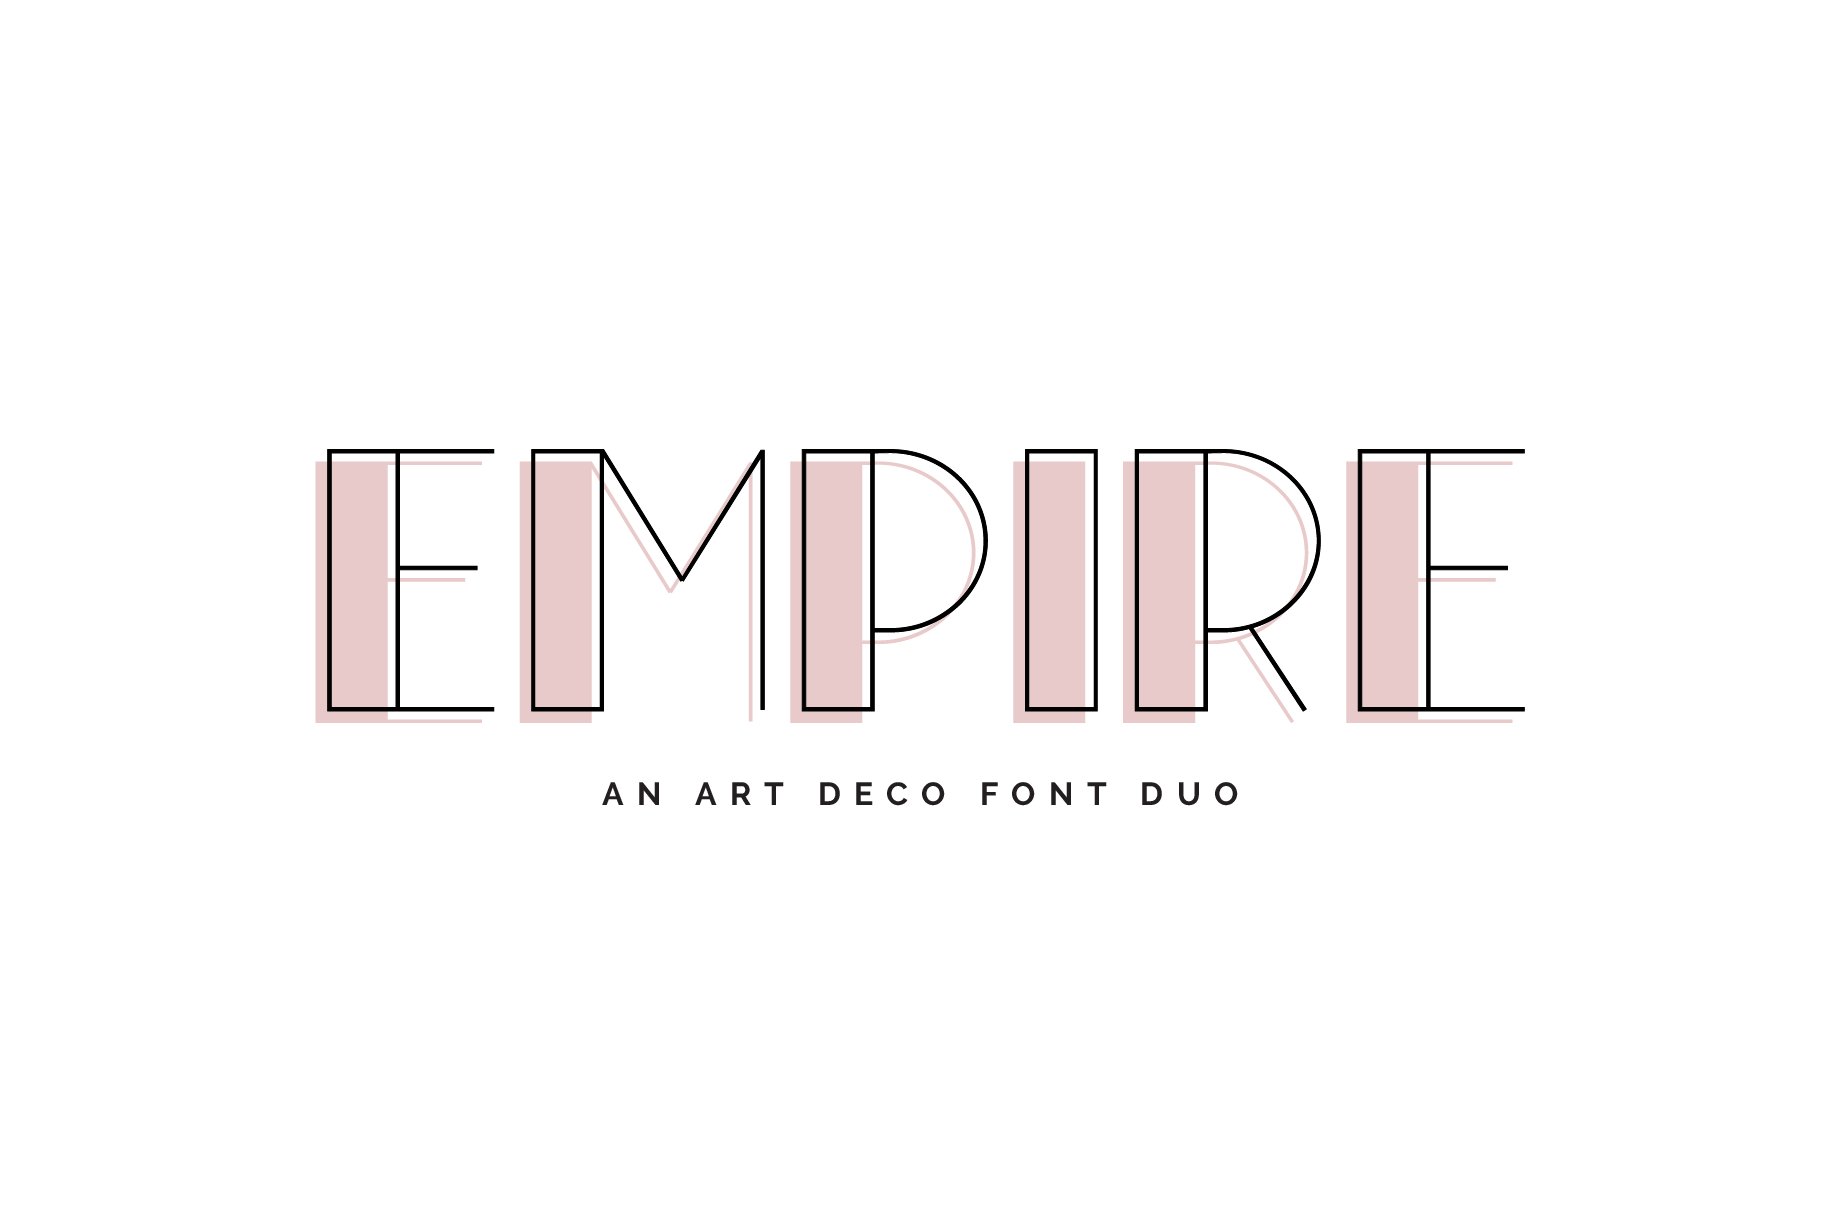 Empire | An Art Deco Font Duo cover image.